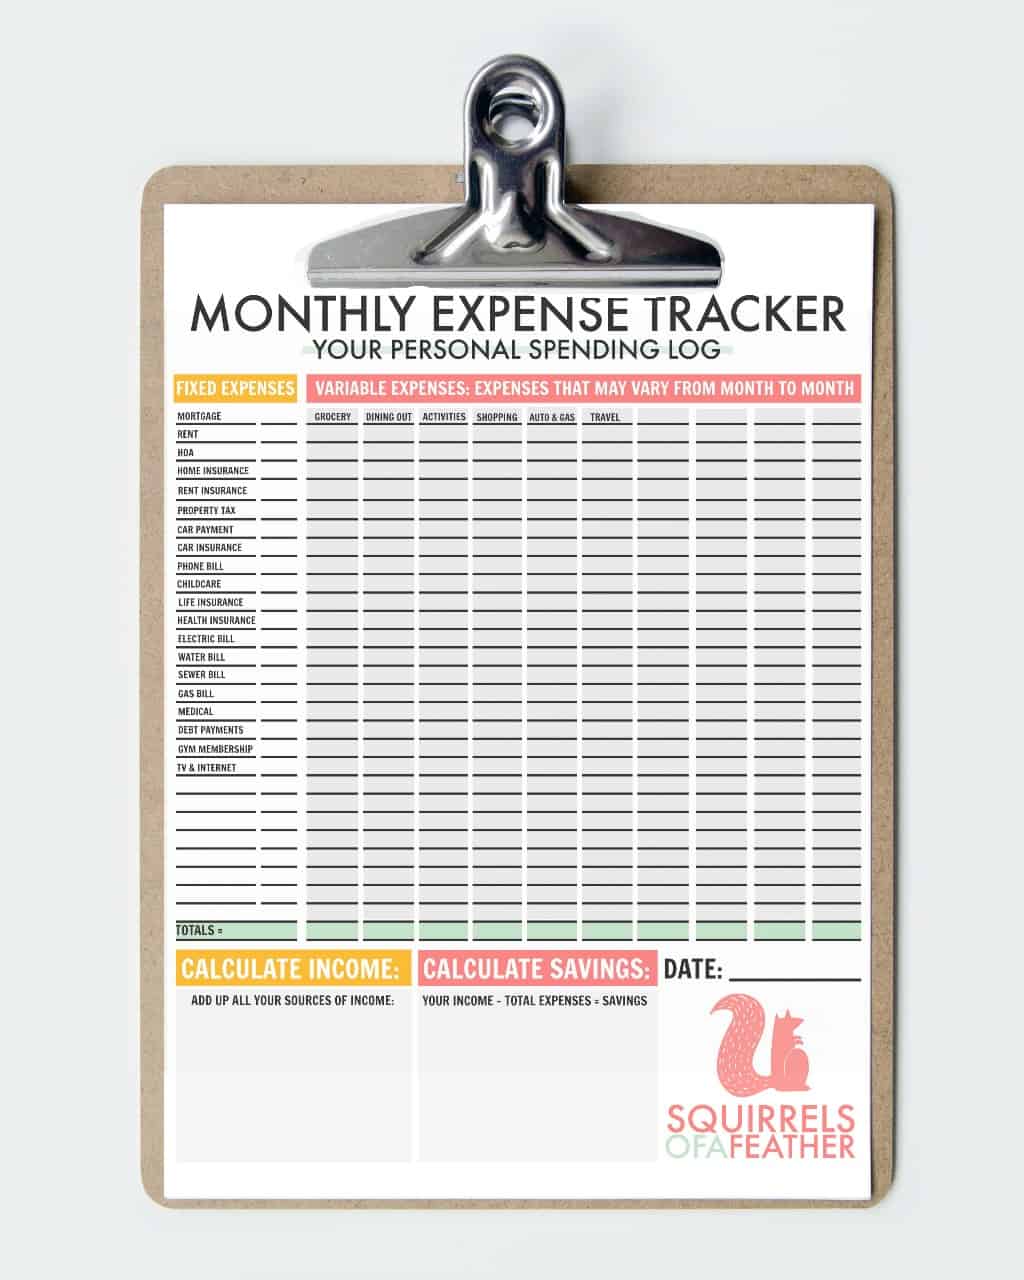 weekly expense tracker printable